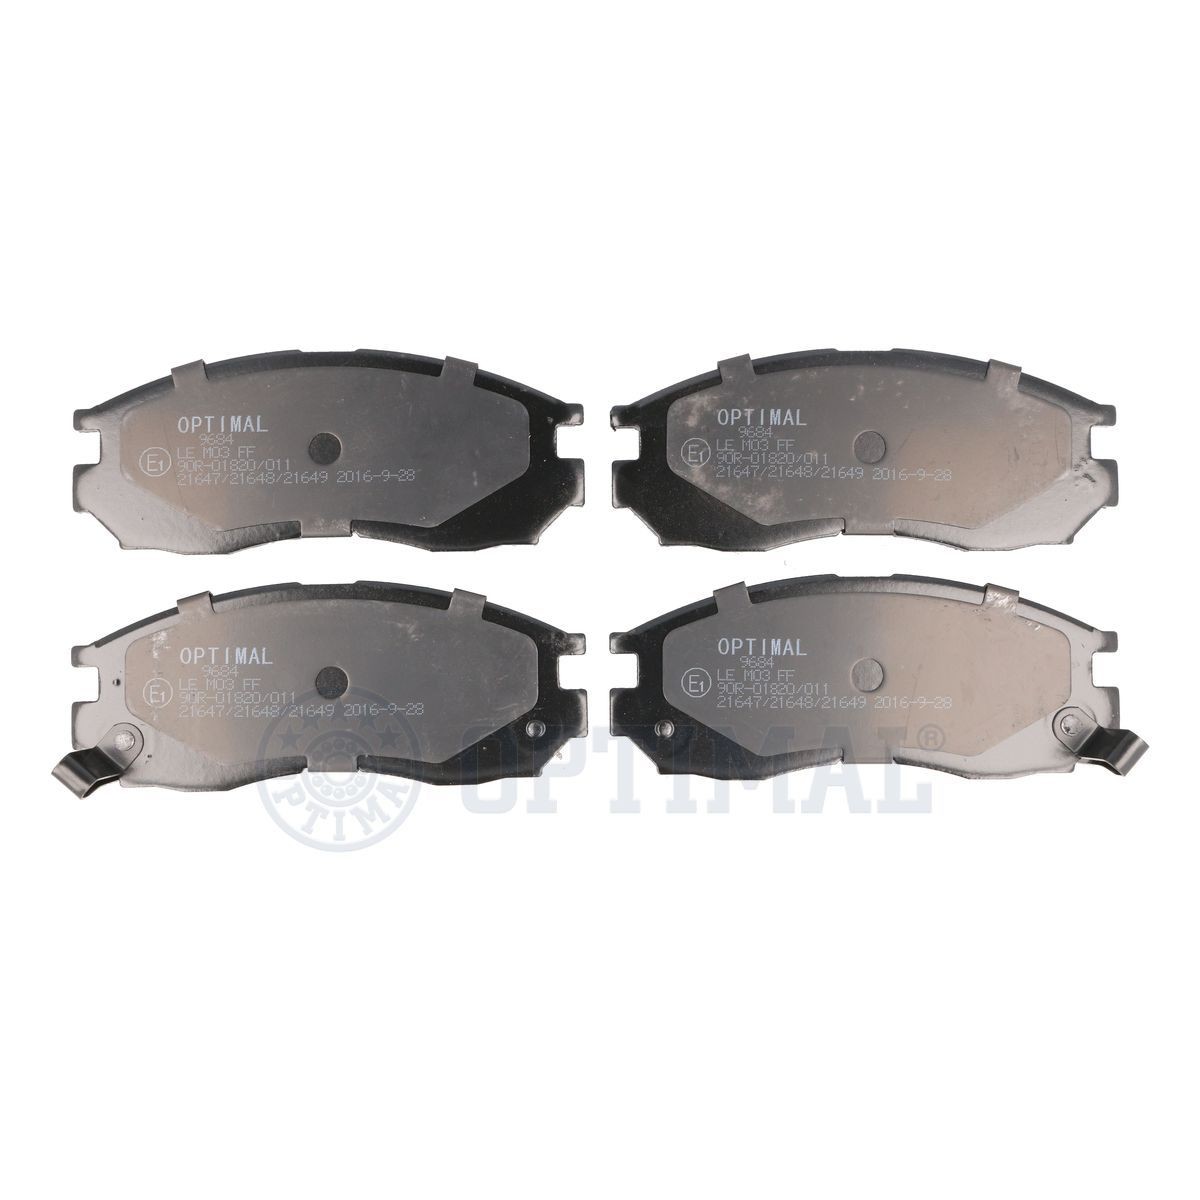 OPTIMAL BP-09684 Brake pad set Front Axle, with acoustic wear warning